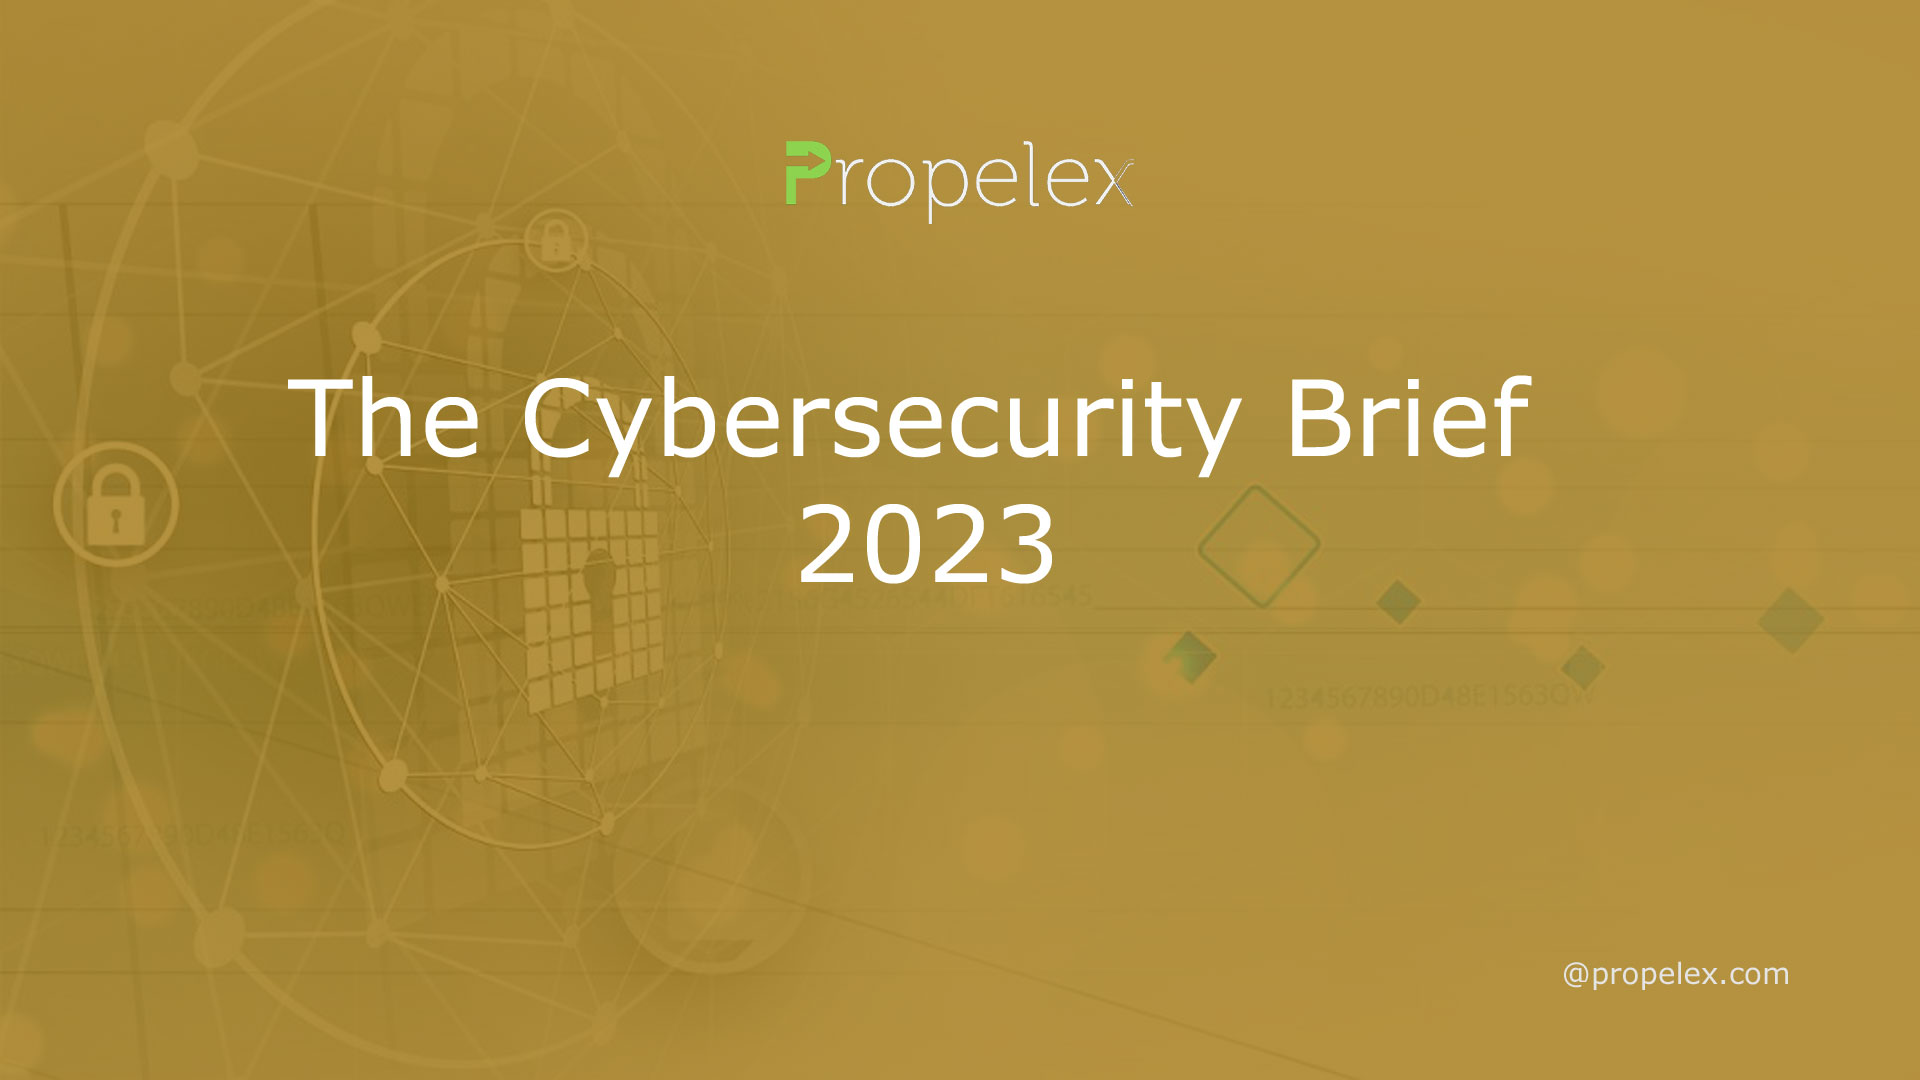 The Cybersecurity Brief 2023